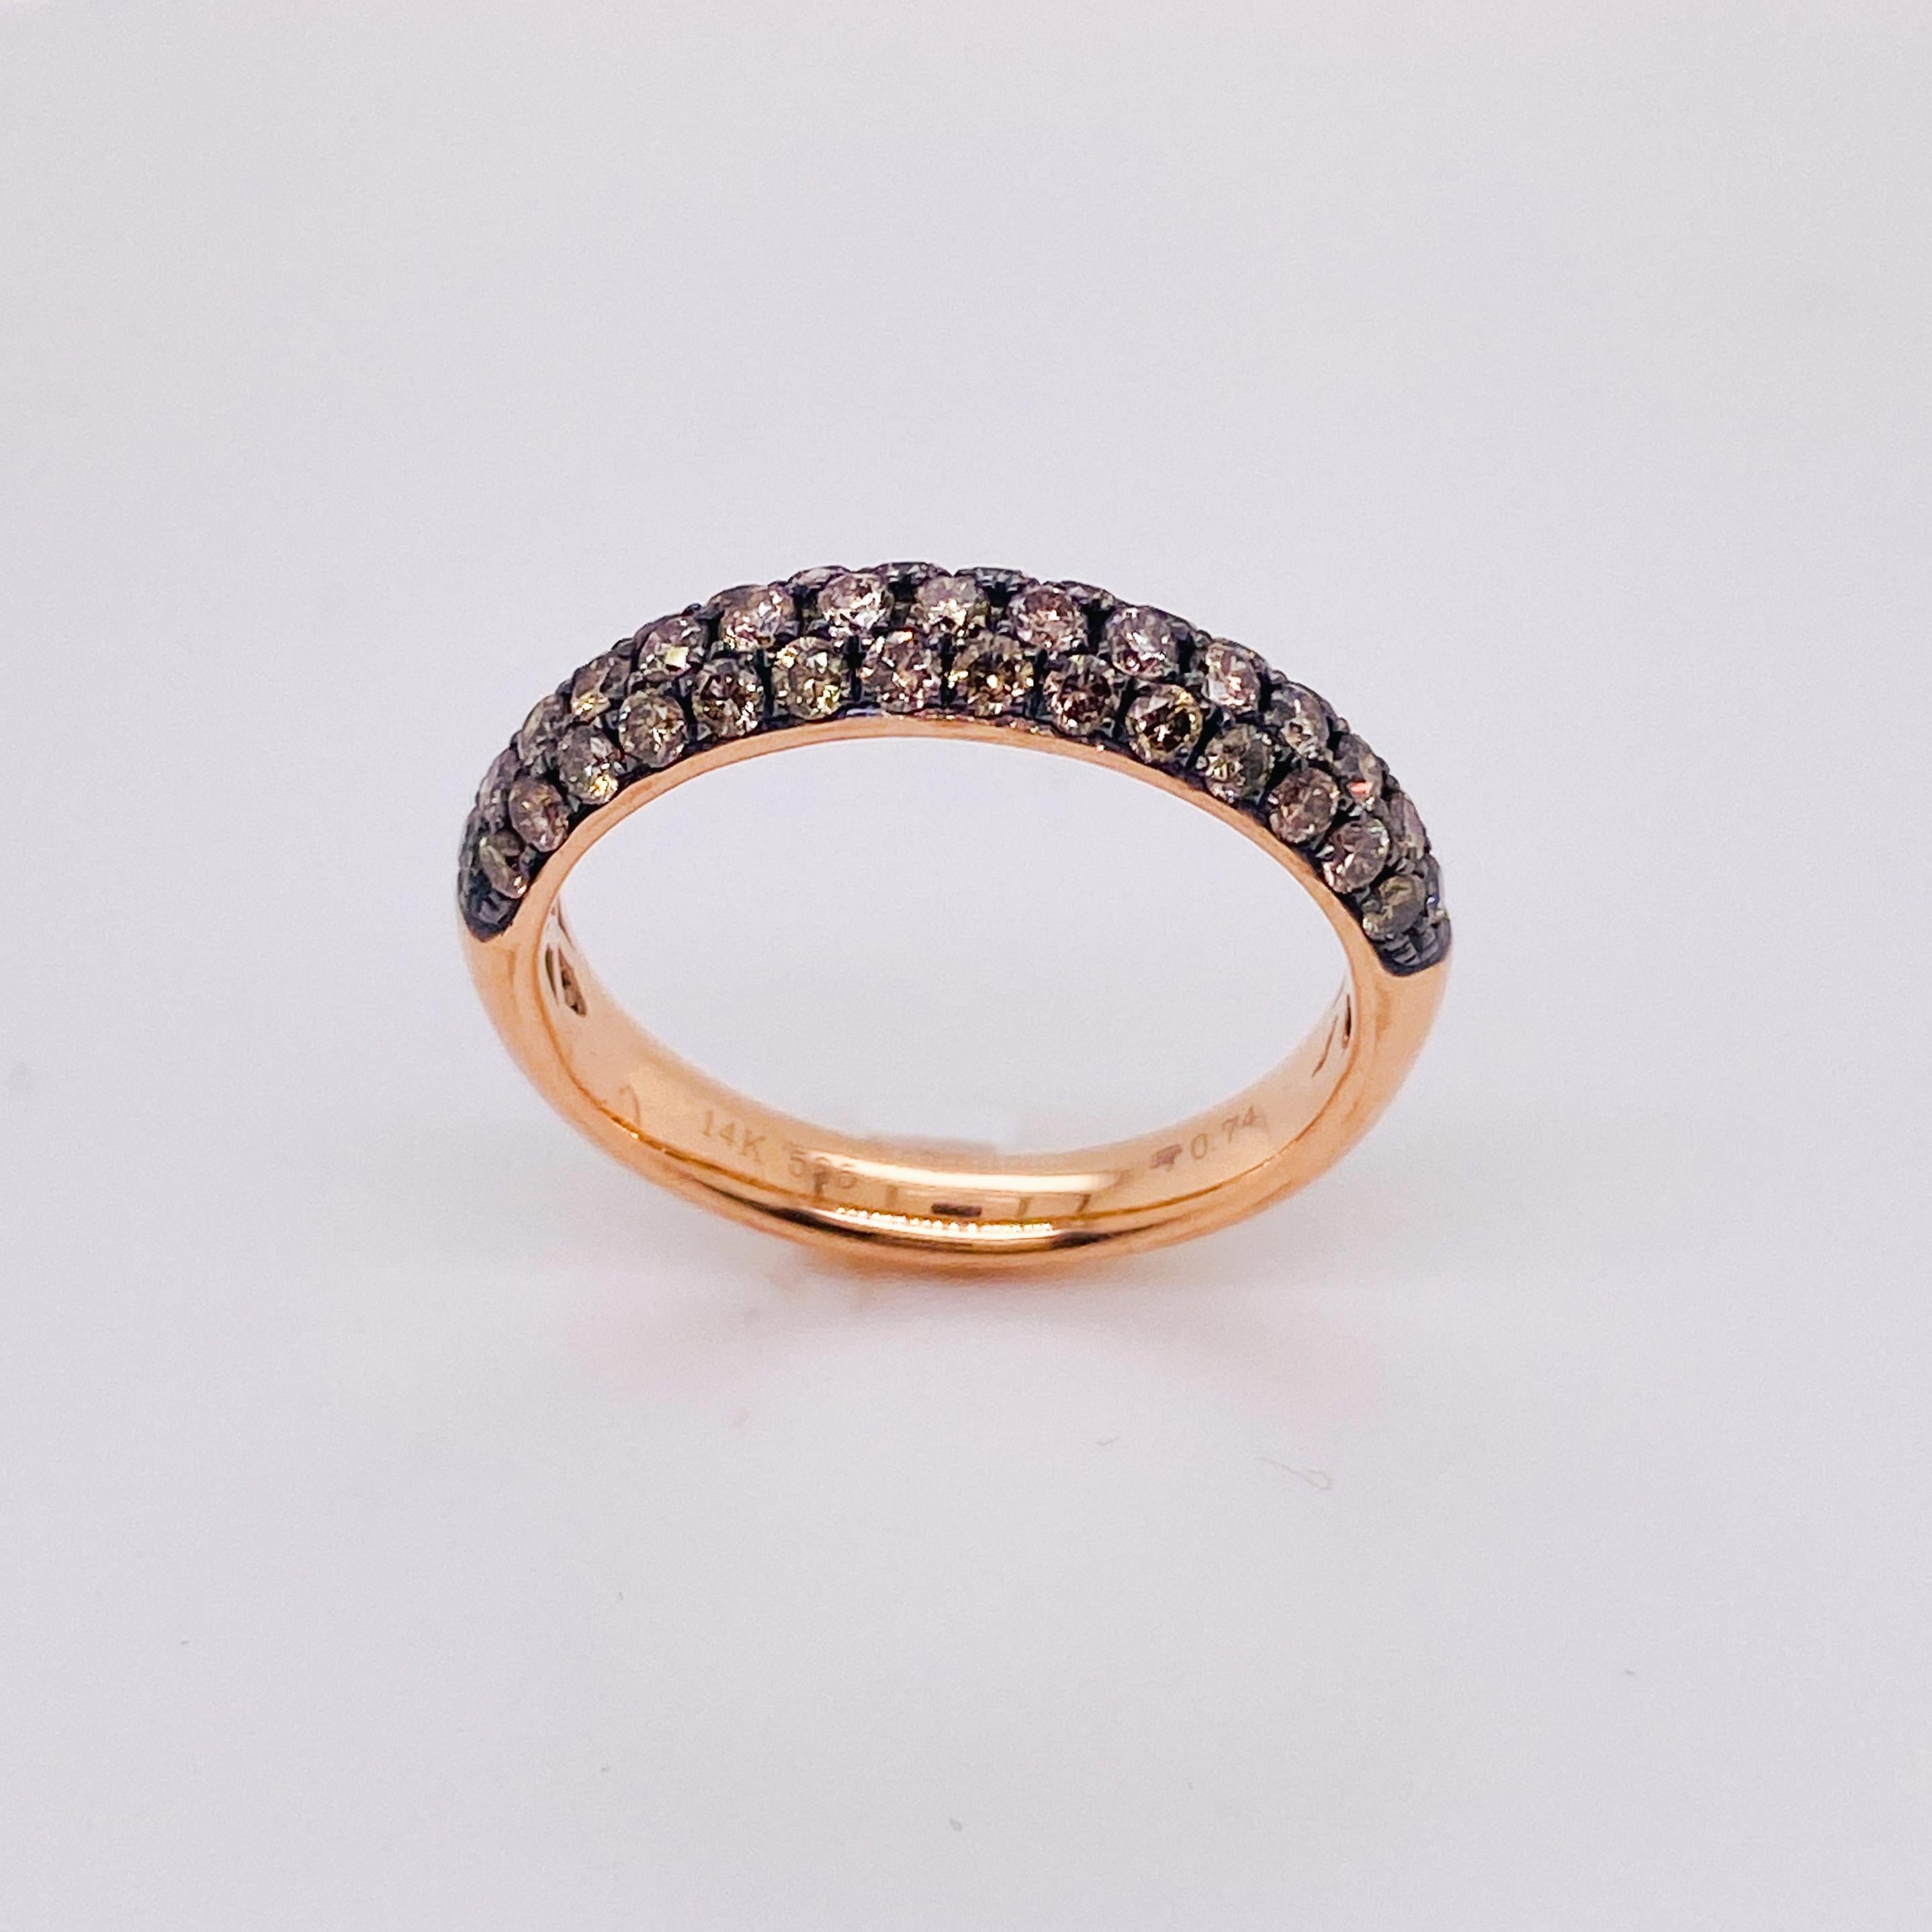 For Sale:  Bombe Champagne Diamond Pave Ring, 3/4 Carats in 14k Rose Gold, Stackable Dome 3